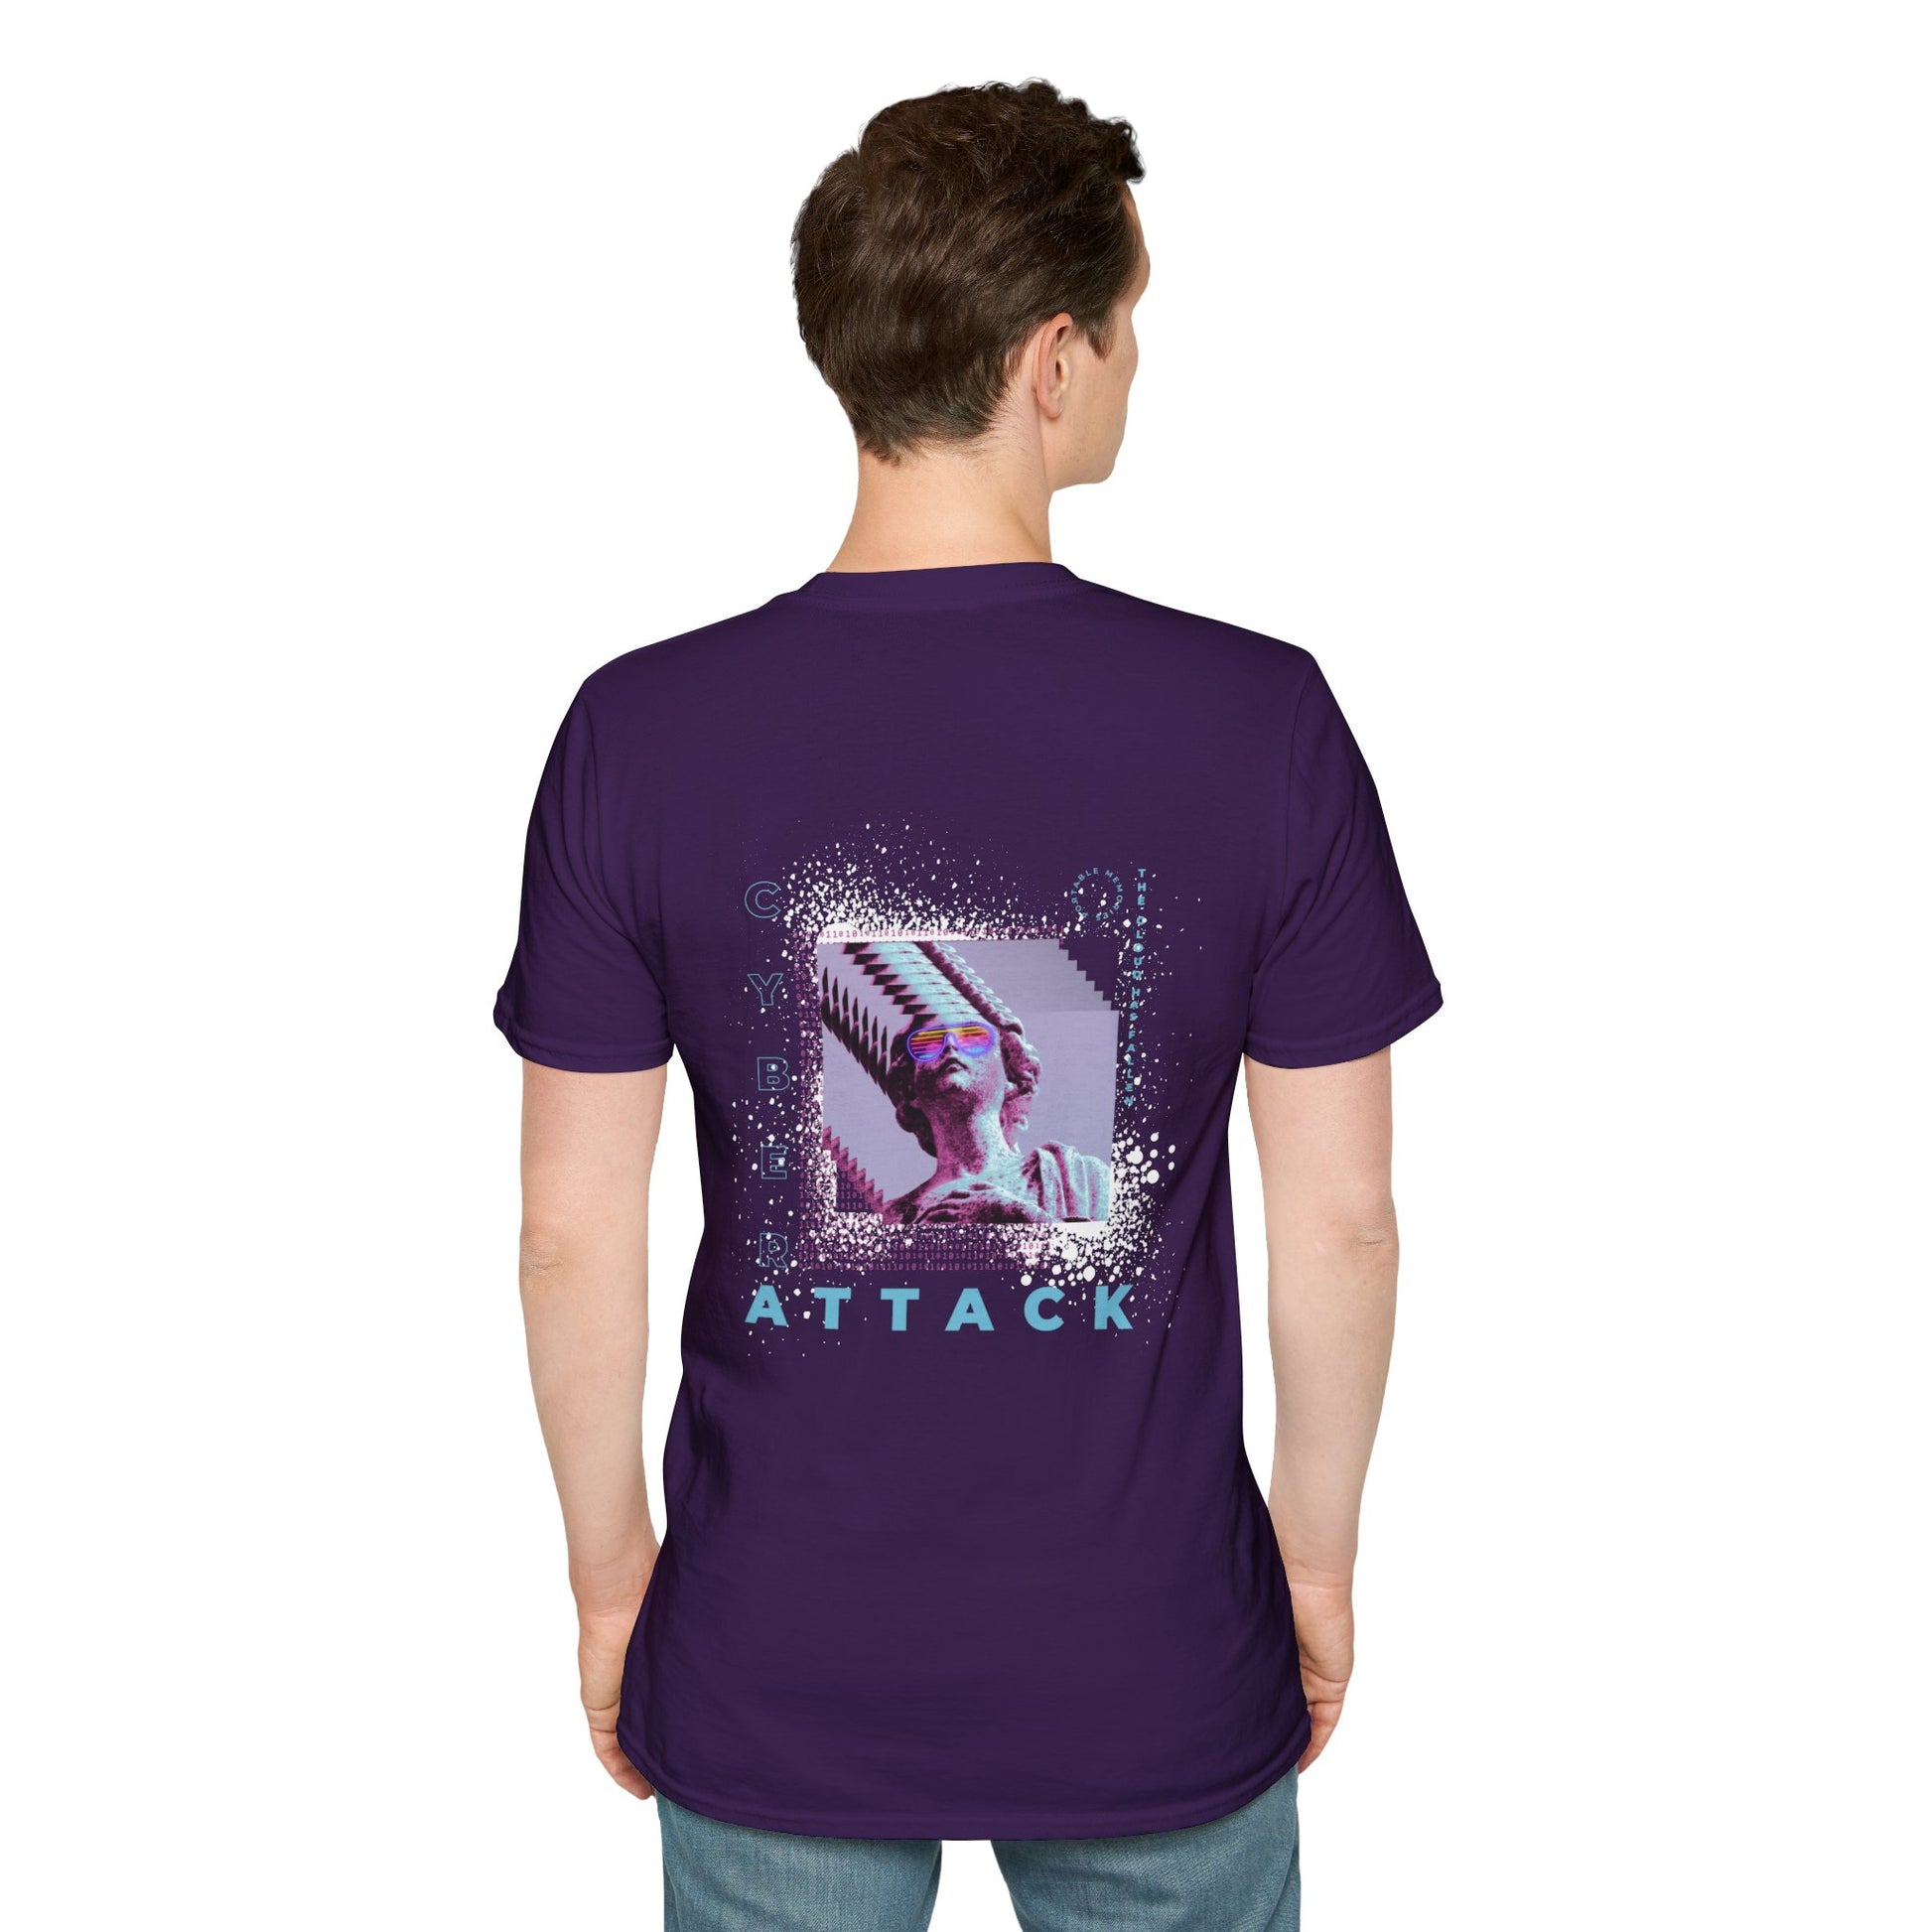 Violet T-shirt with a pixelated Statue of Liberty and modern glitch art design